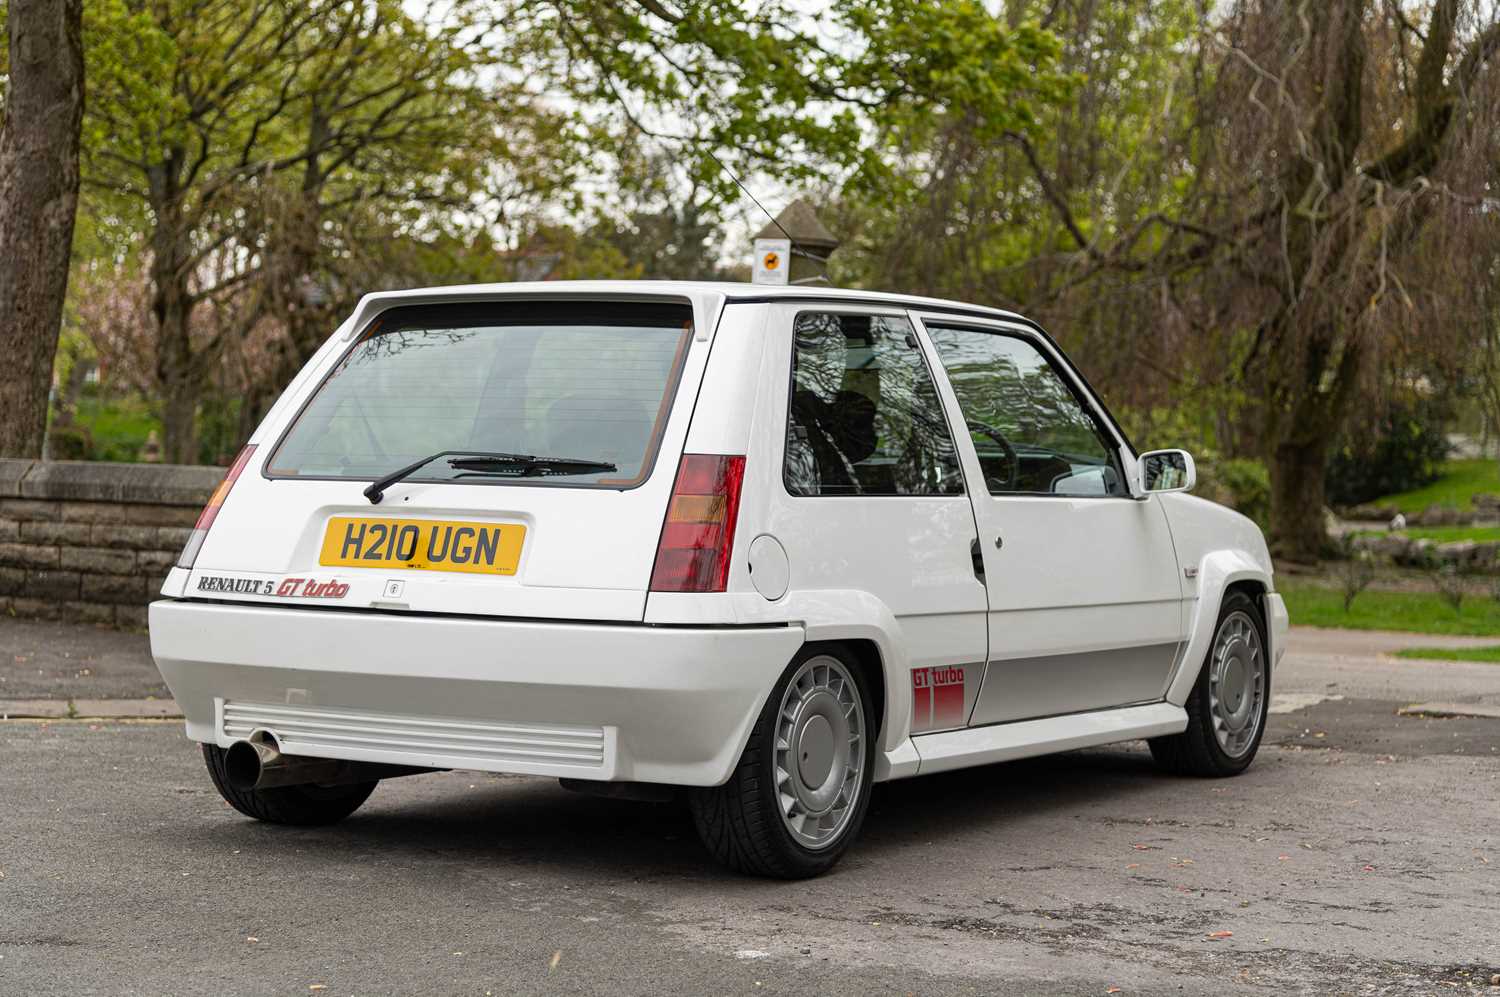 1990 Renault 5 GT Turbo - Image 15 of 79